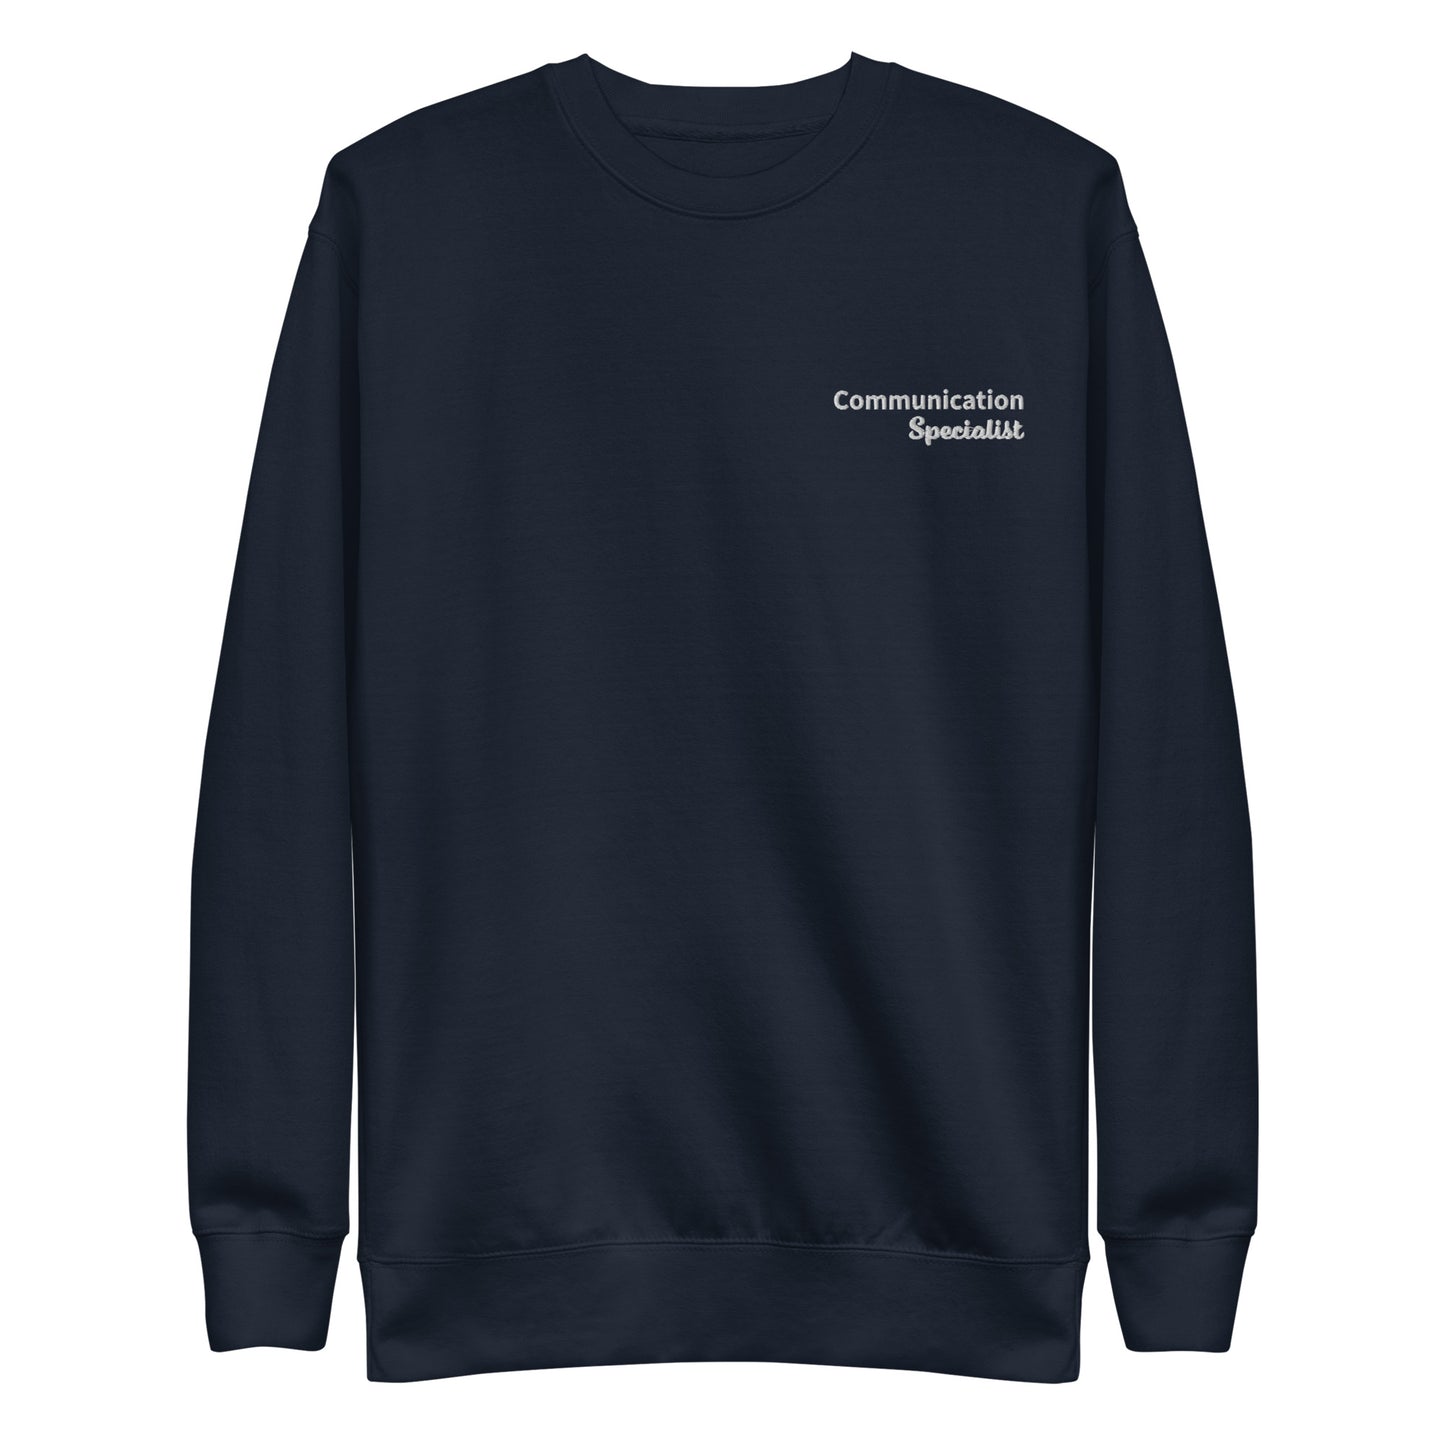 "Communication Specialist" Embroidered Sweater